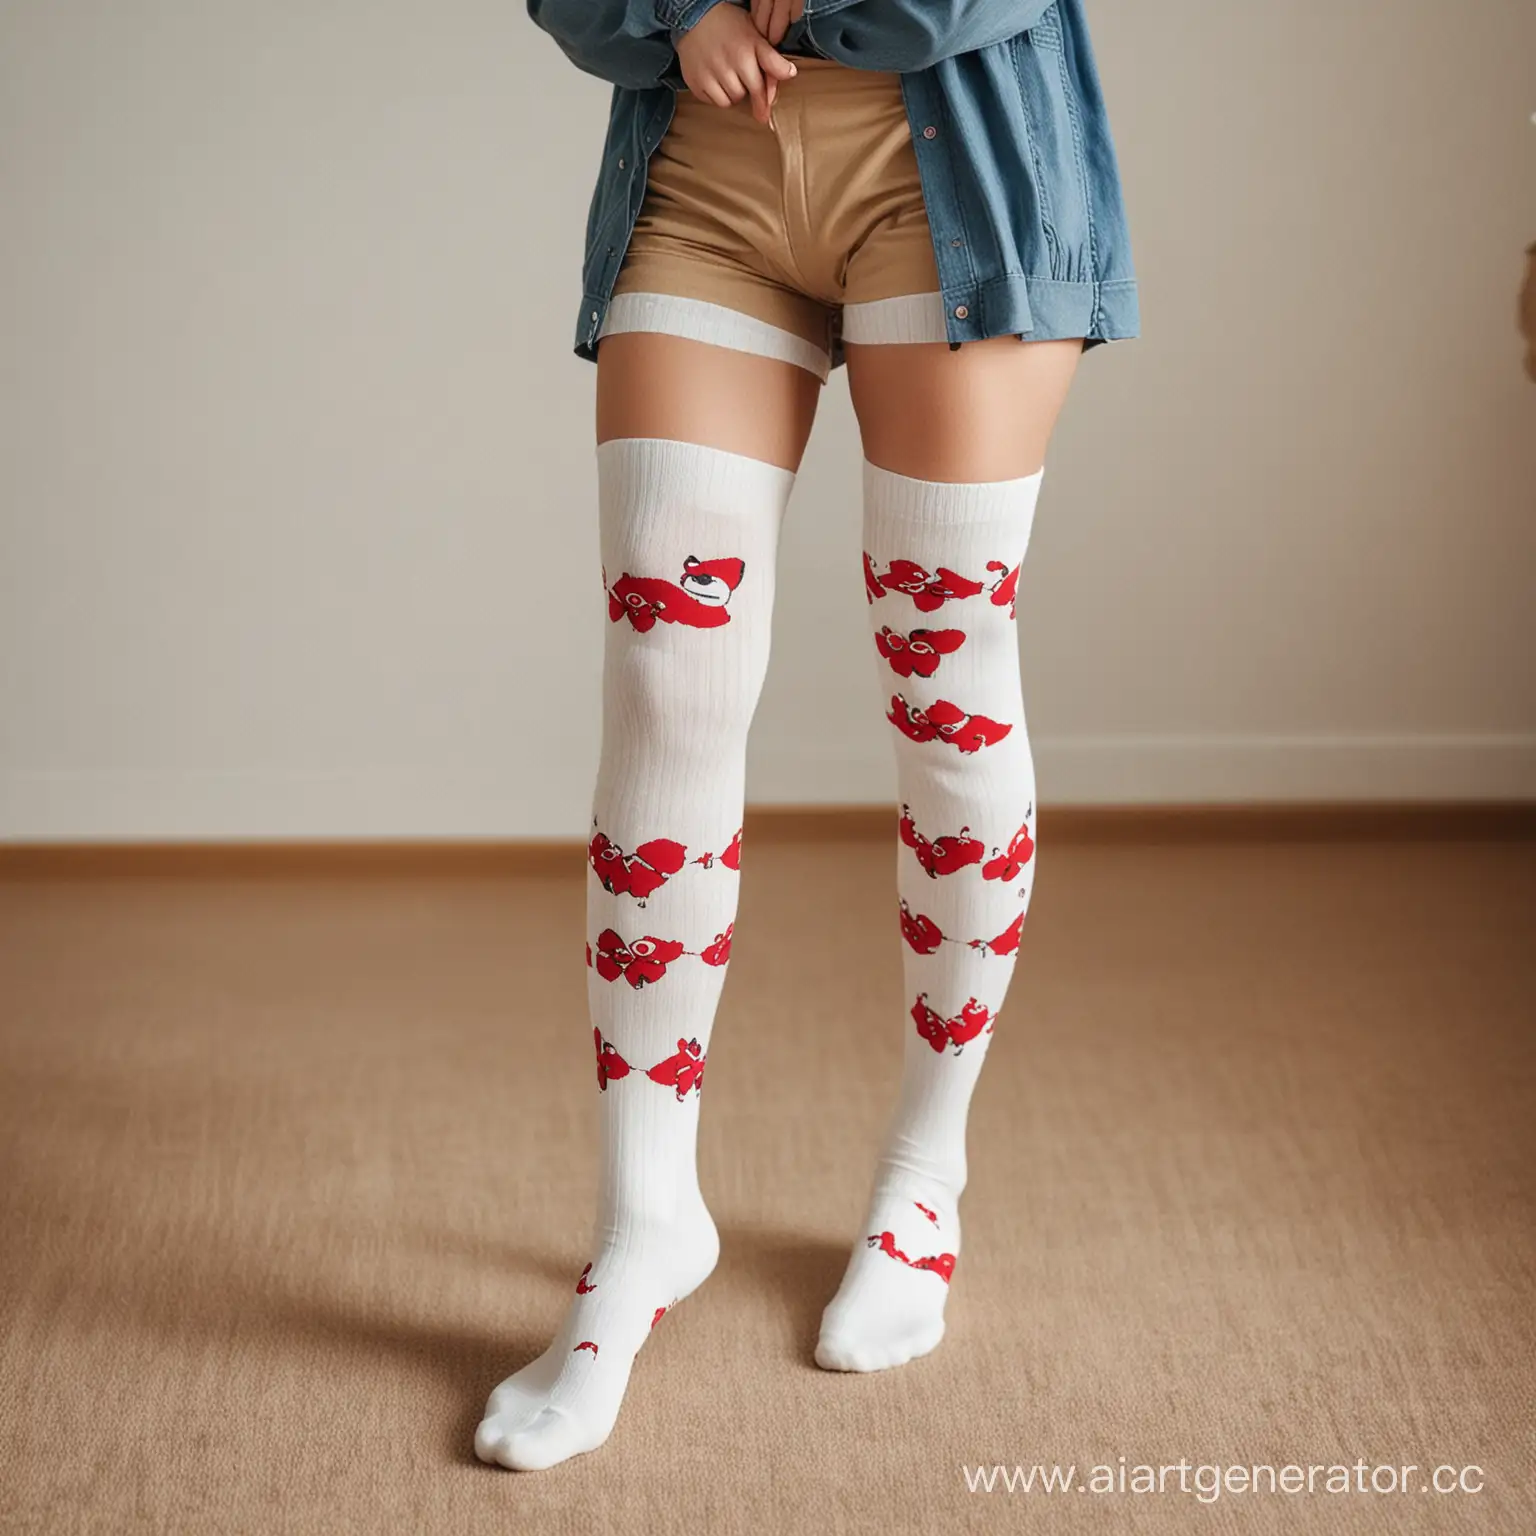 FullLength-Girl-in-ThighHigh-Socks-with-Unique-Design